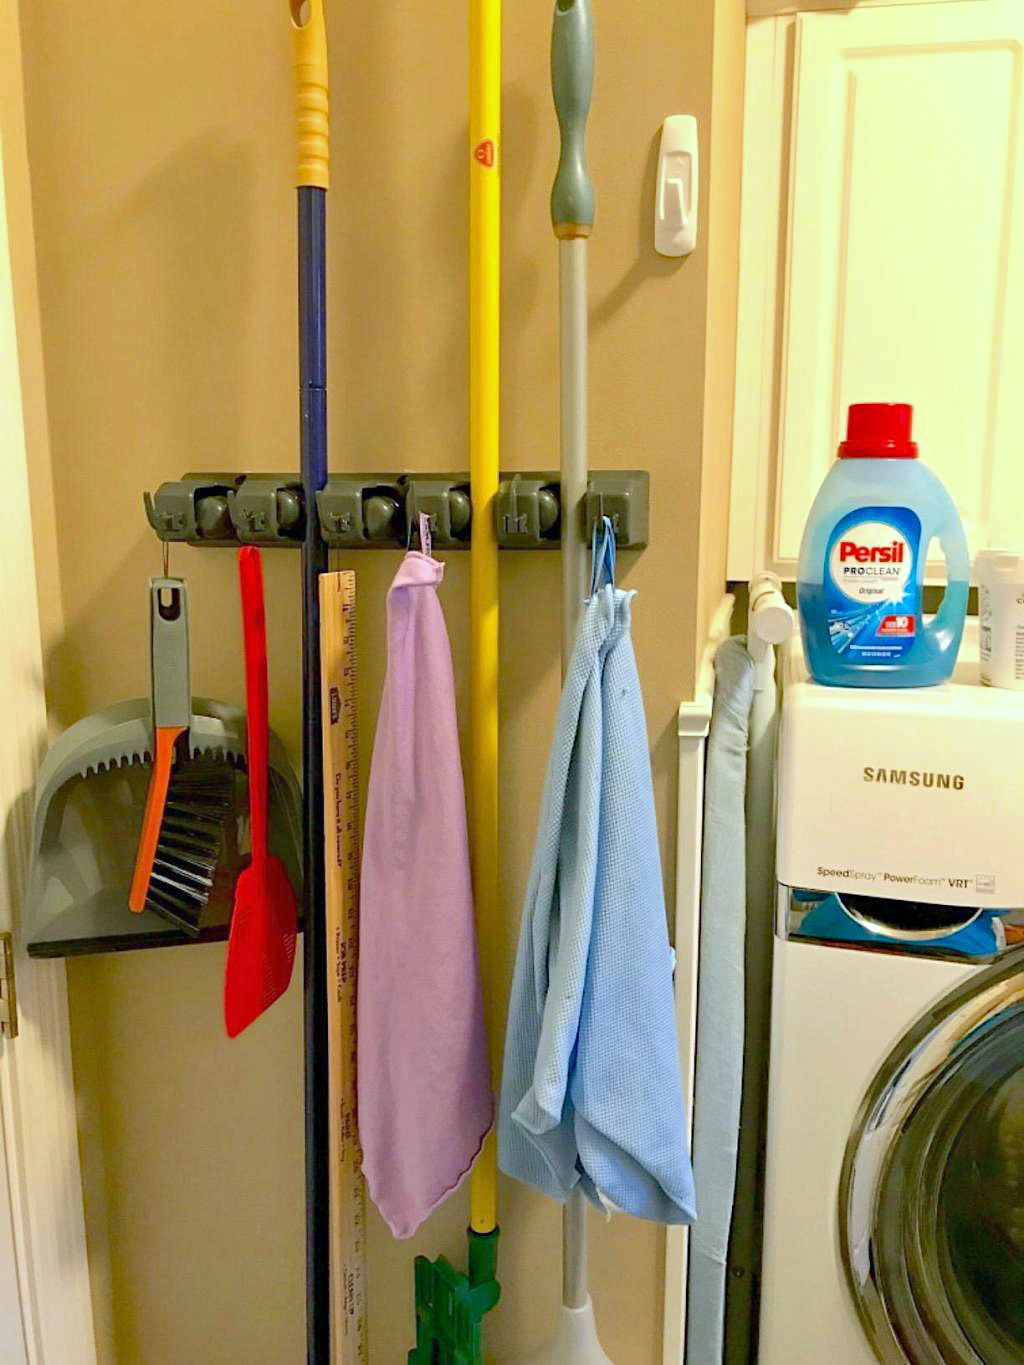 cleaning organizer by dryer - edited